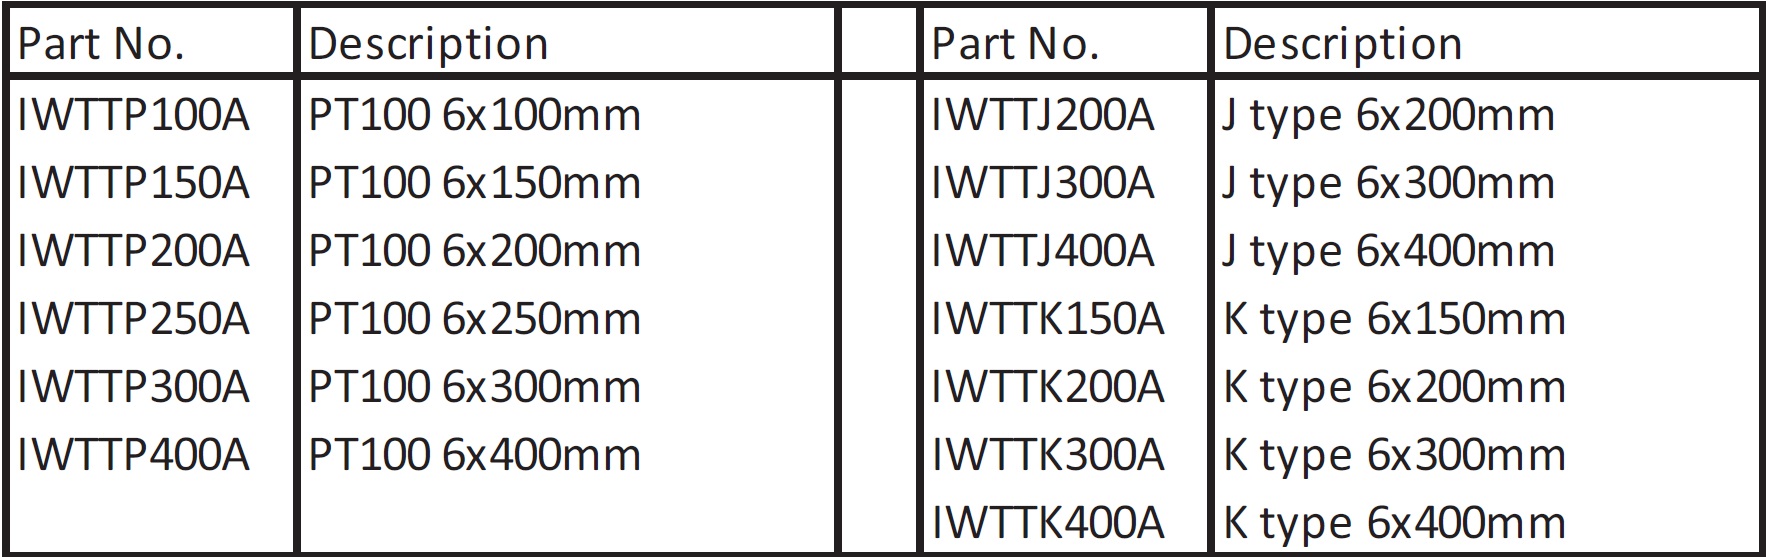 Cynergy3 IWTT Series ordering information